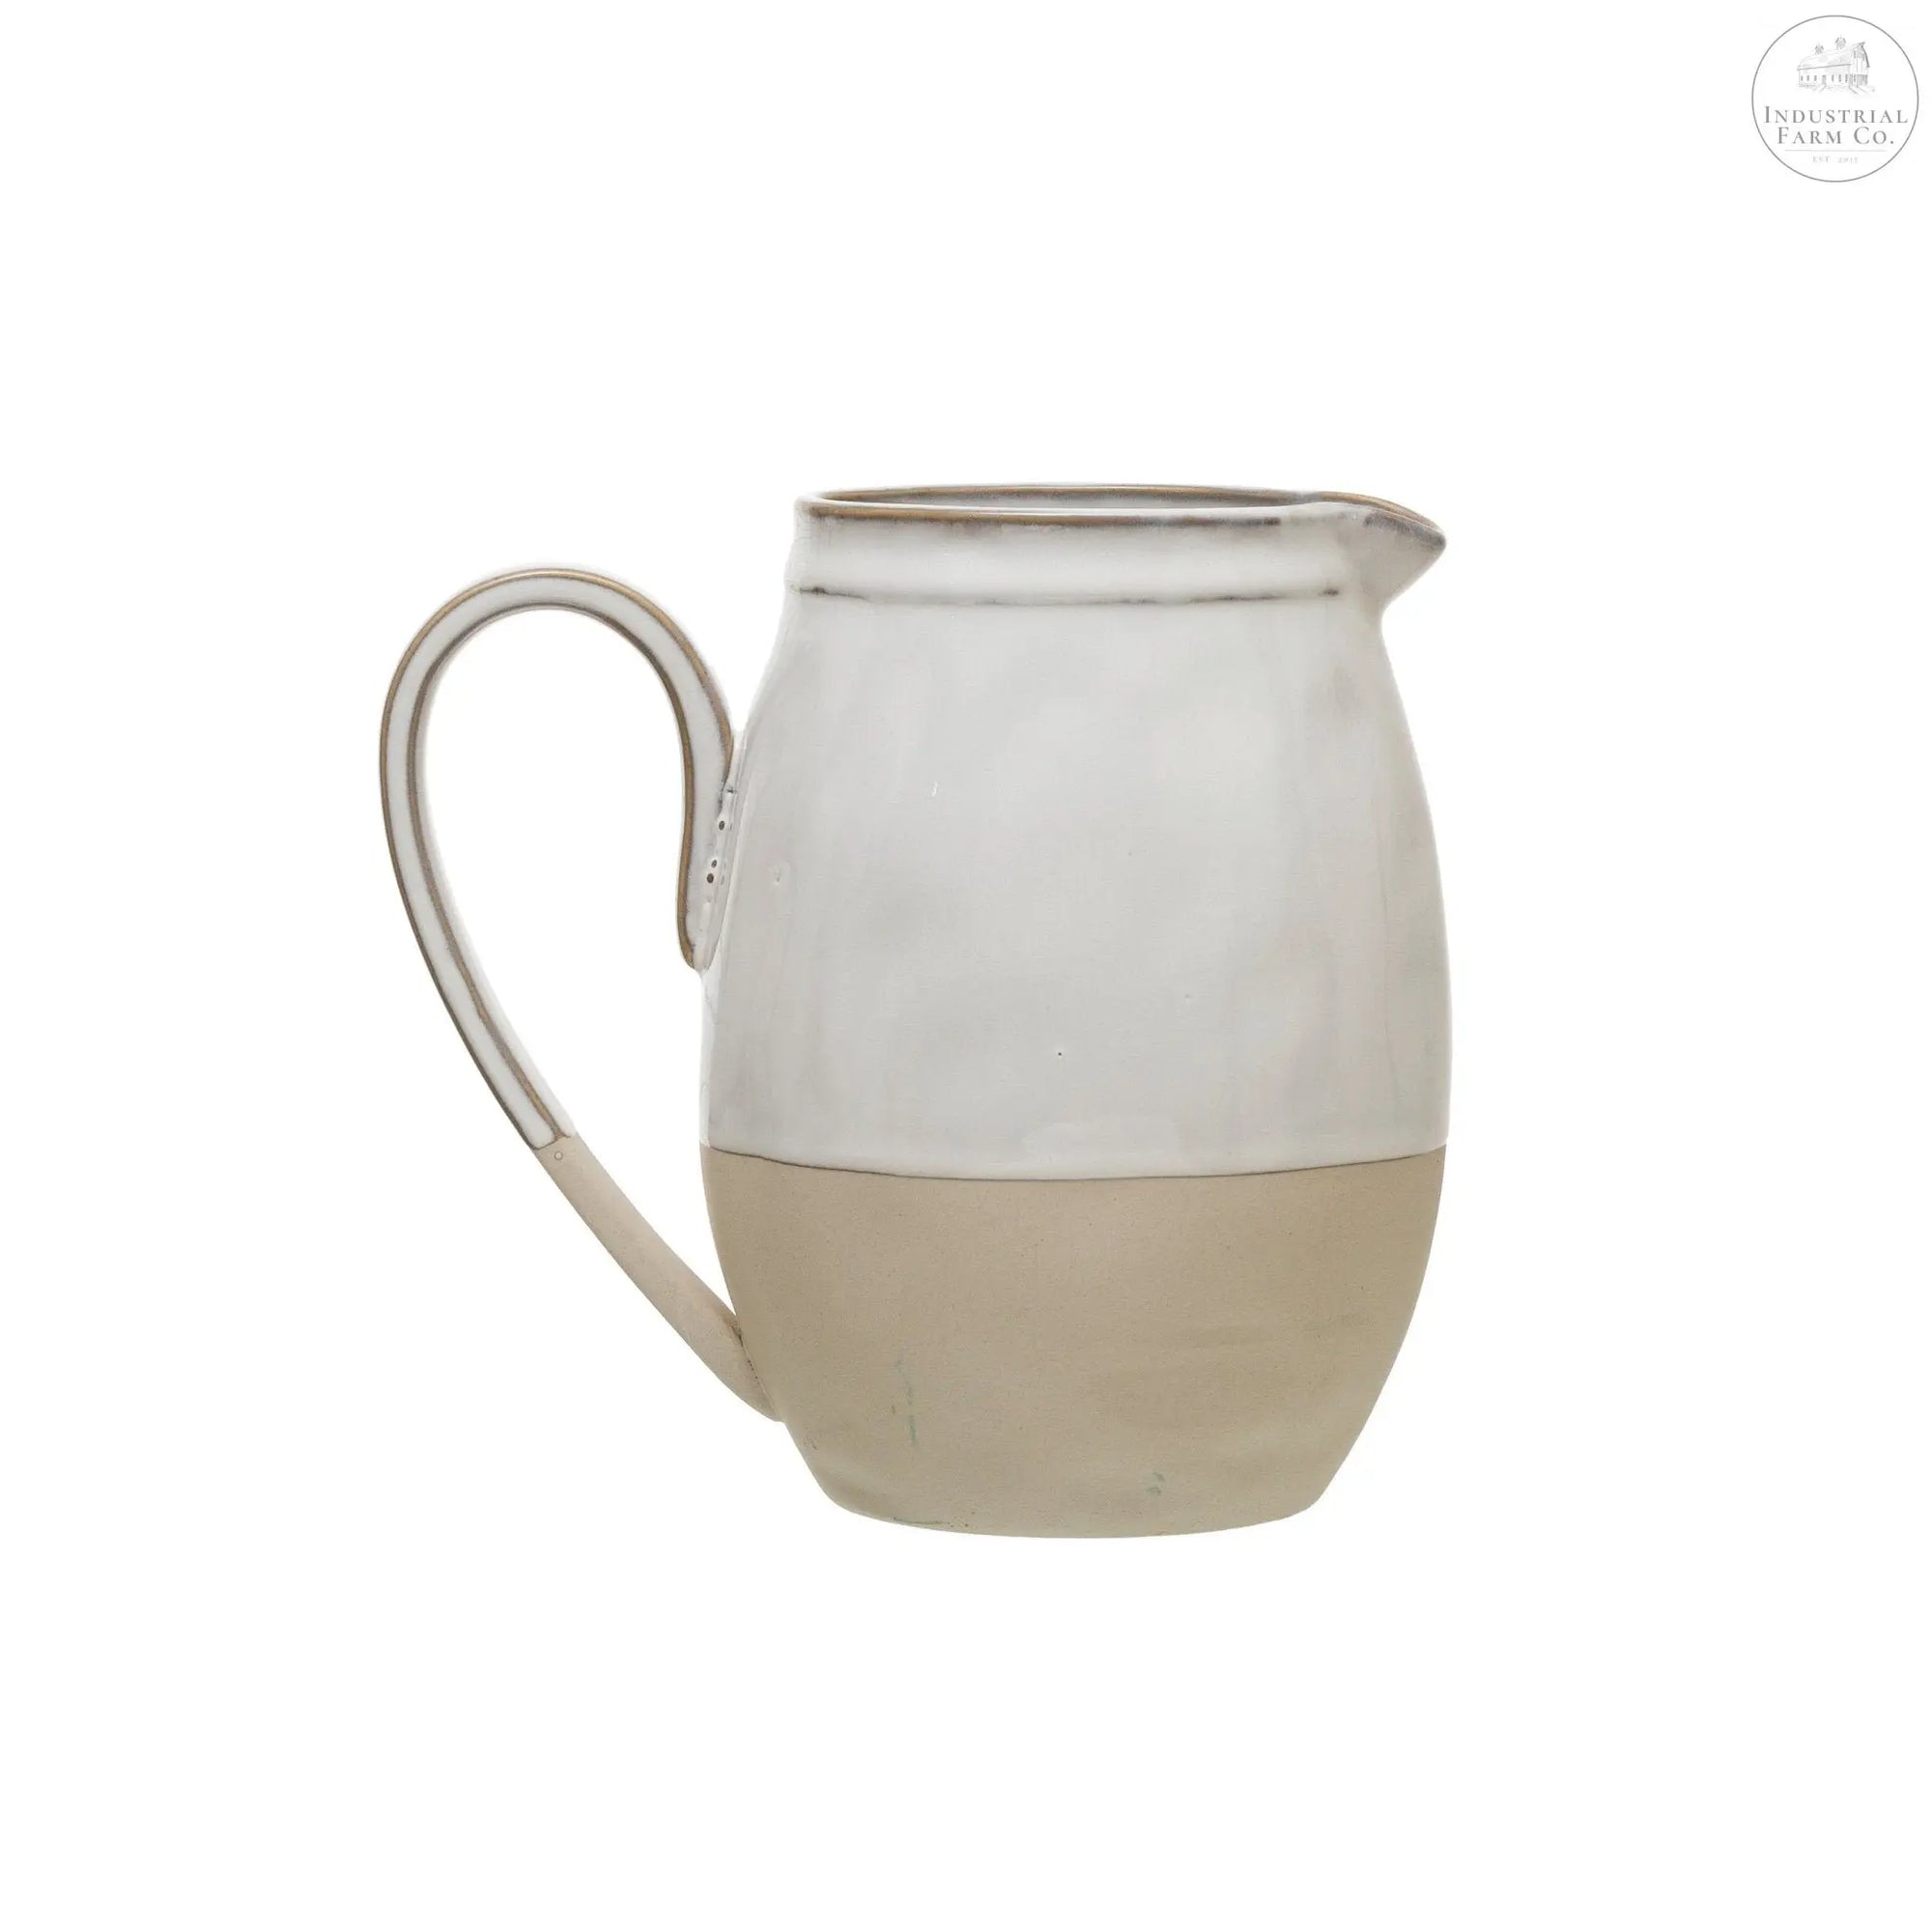 The Homestead Pitcher | Industrial Farm Co